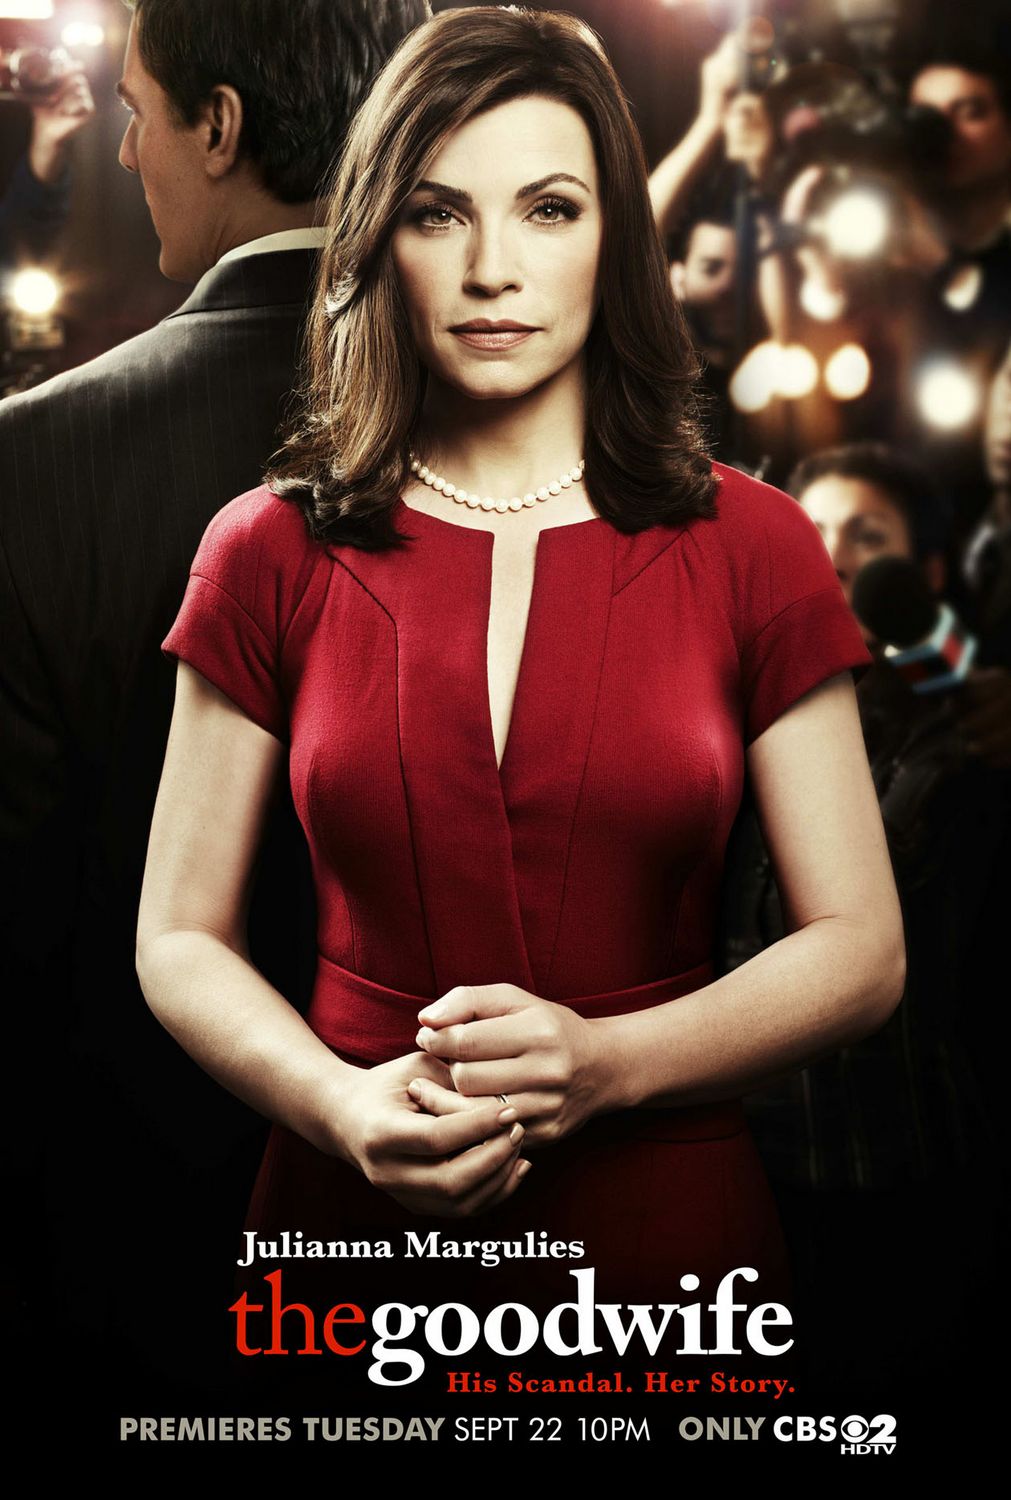 The Good Wife A3 Poster 2 